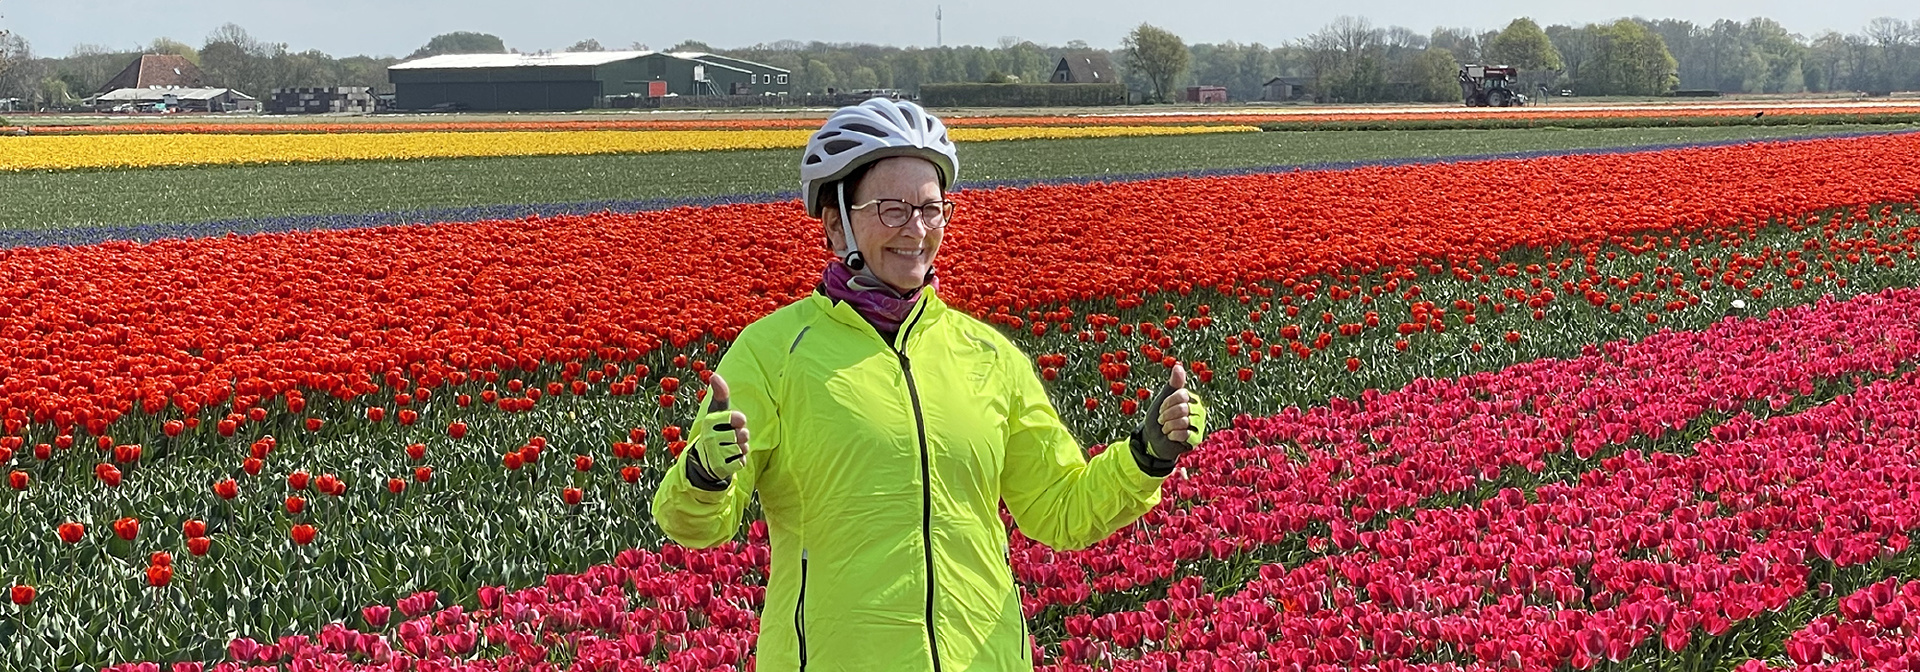 Netherlands Sail & Cycle Tulip Tour